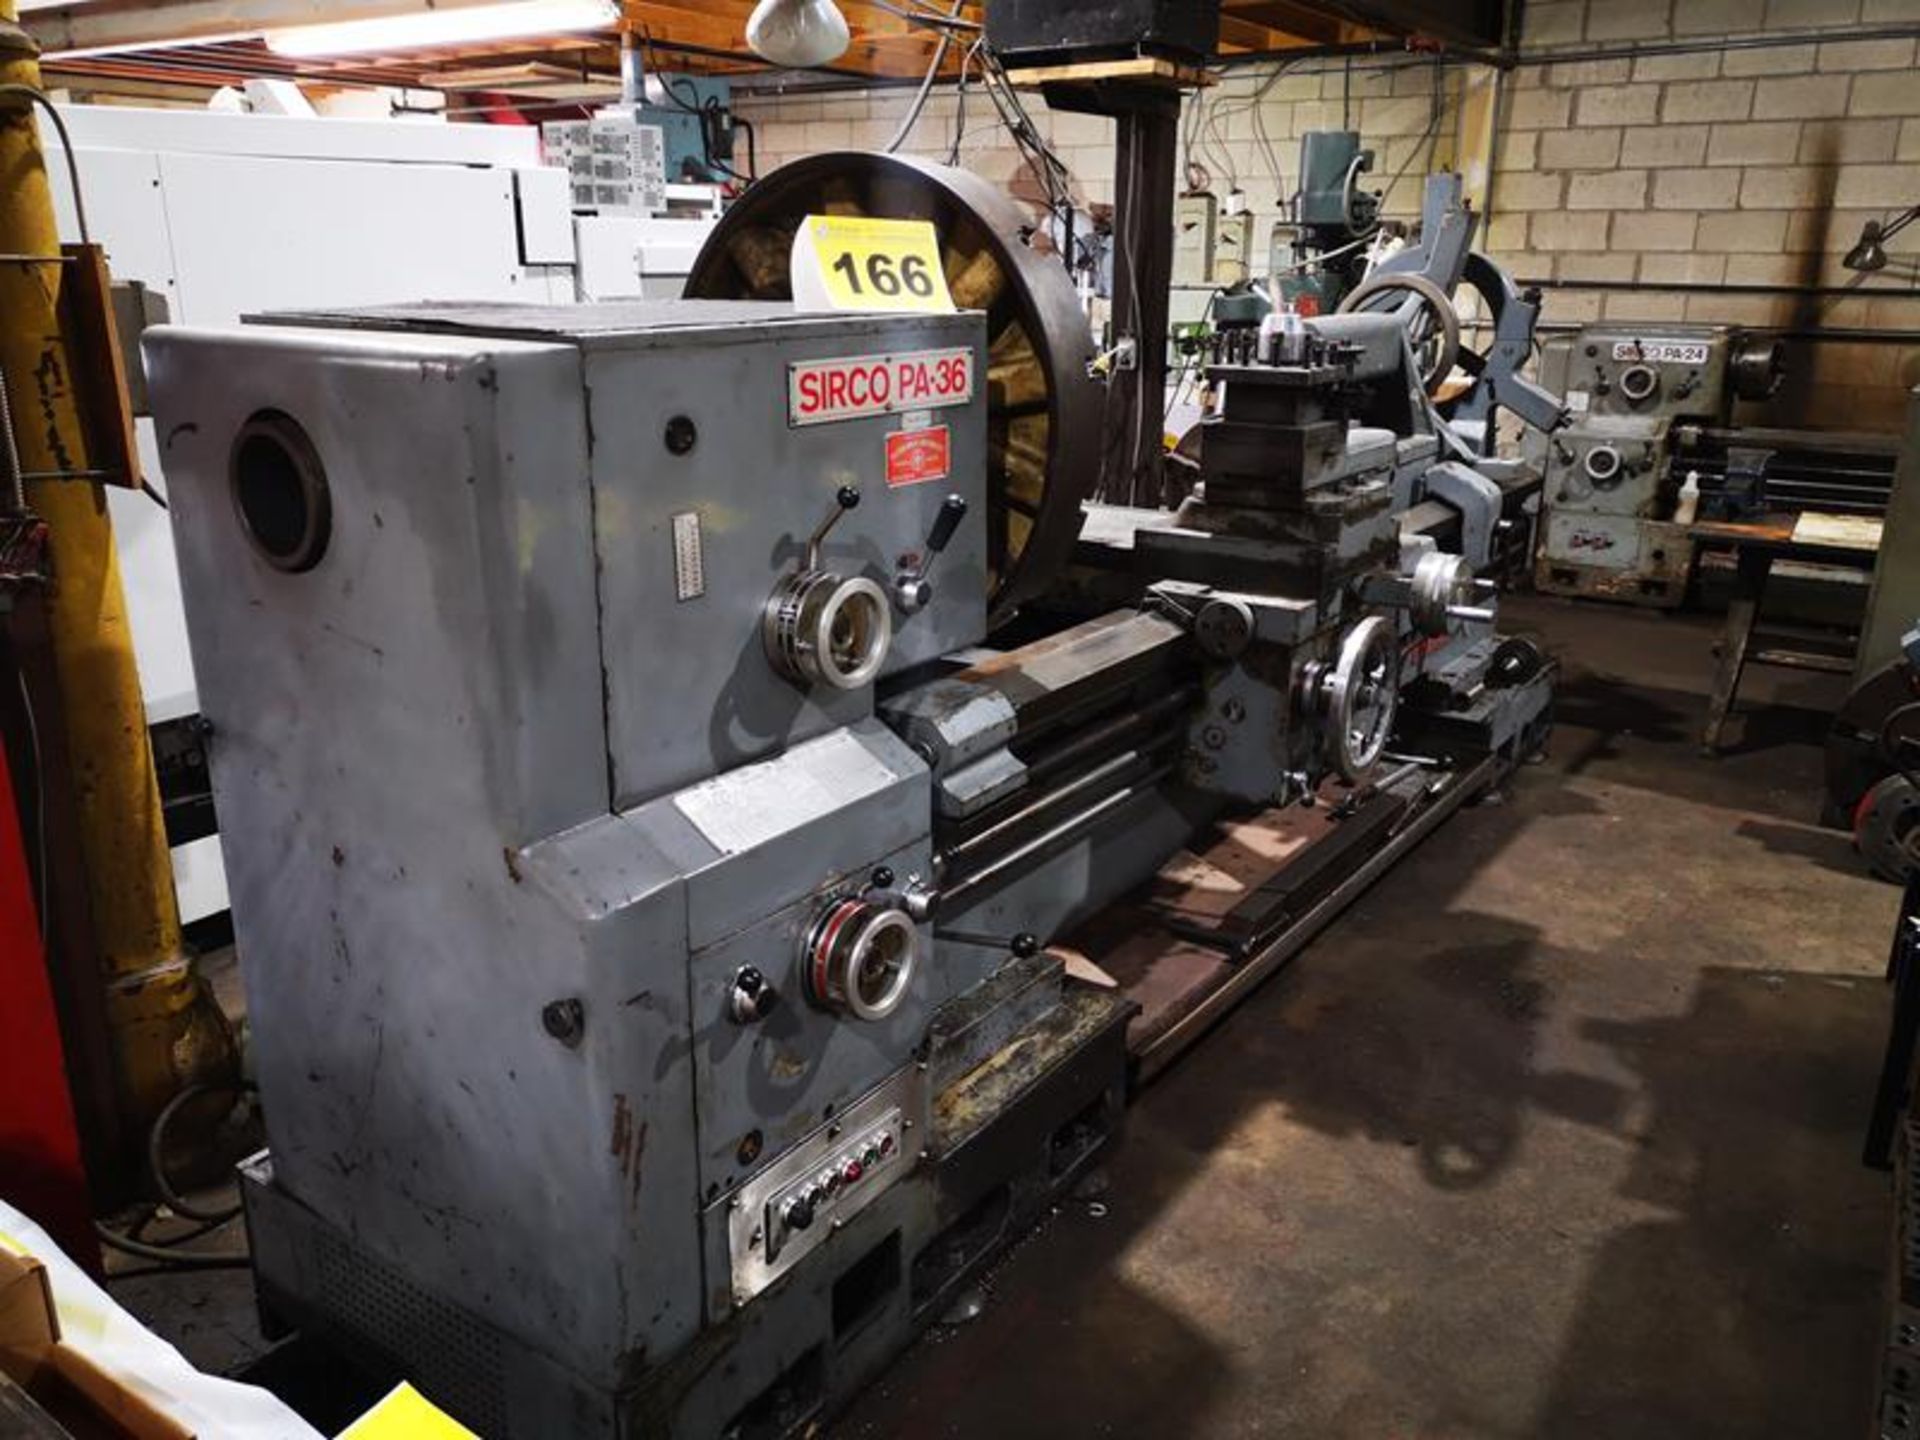 SIRCO, PA36 GAP BED ENGINE LATHE, 36" SWING OVER BED (44" IN GAP) 26" SWING OVER SLIDE, 75"